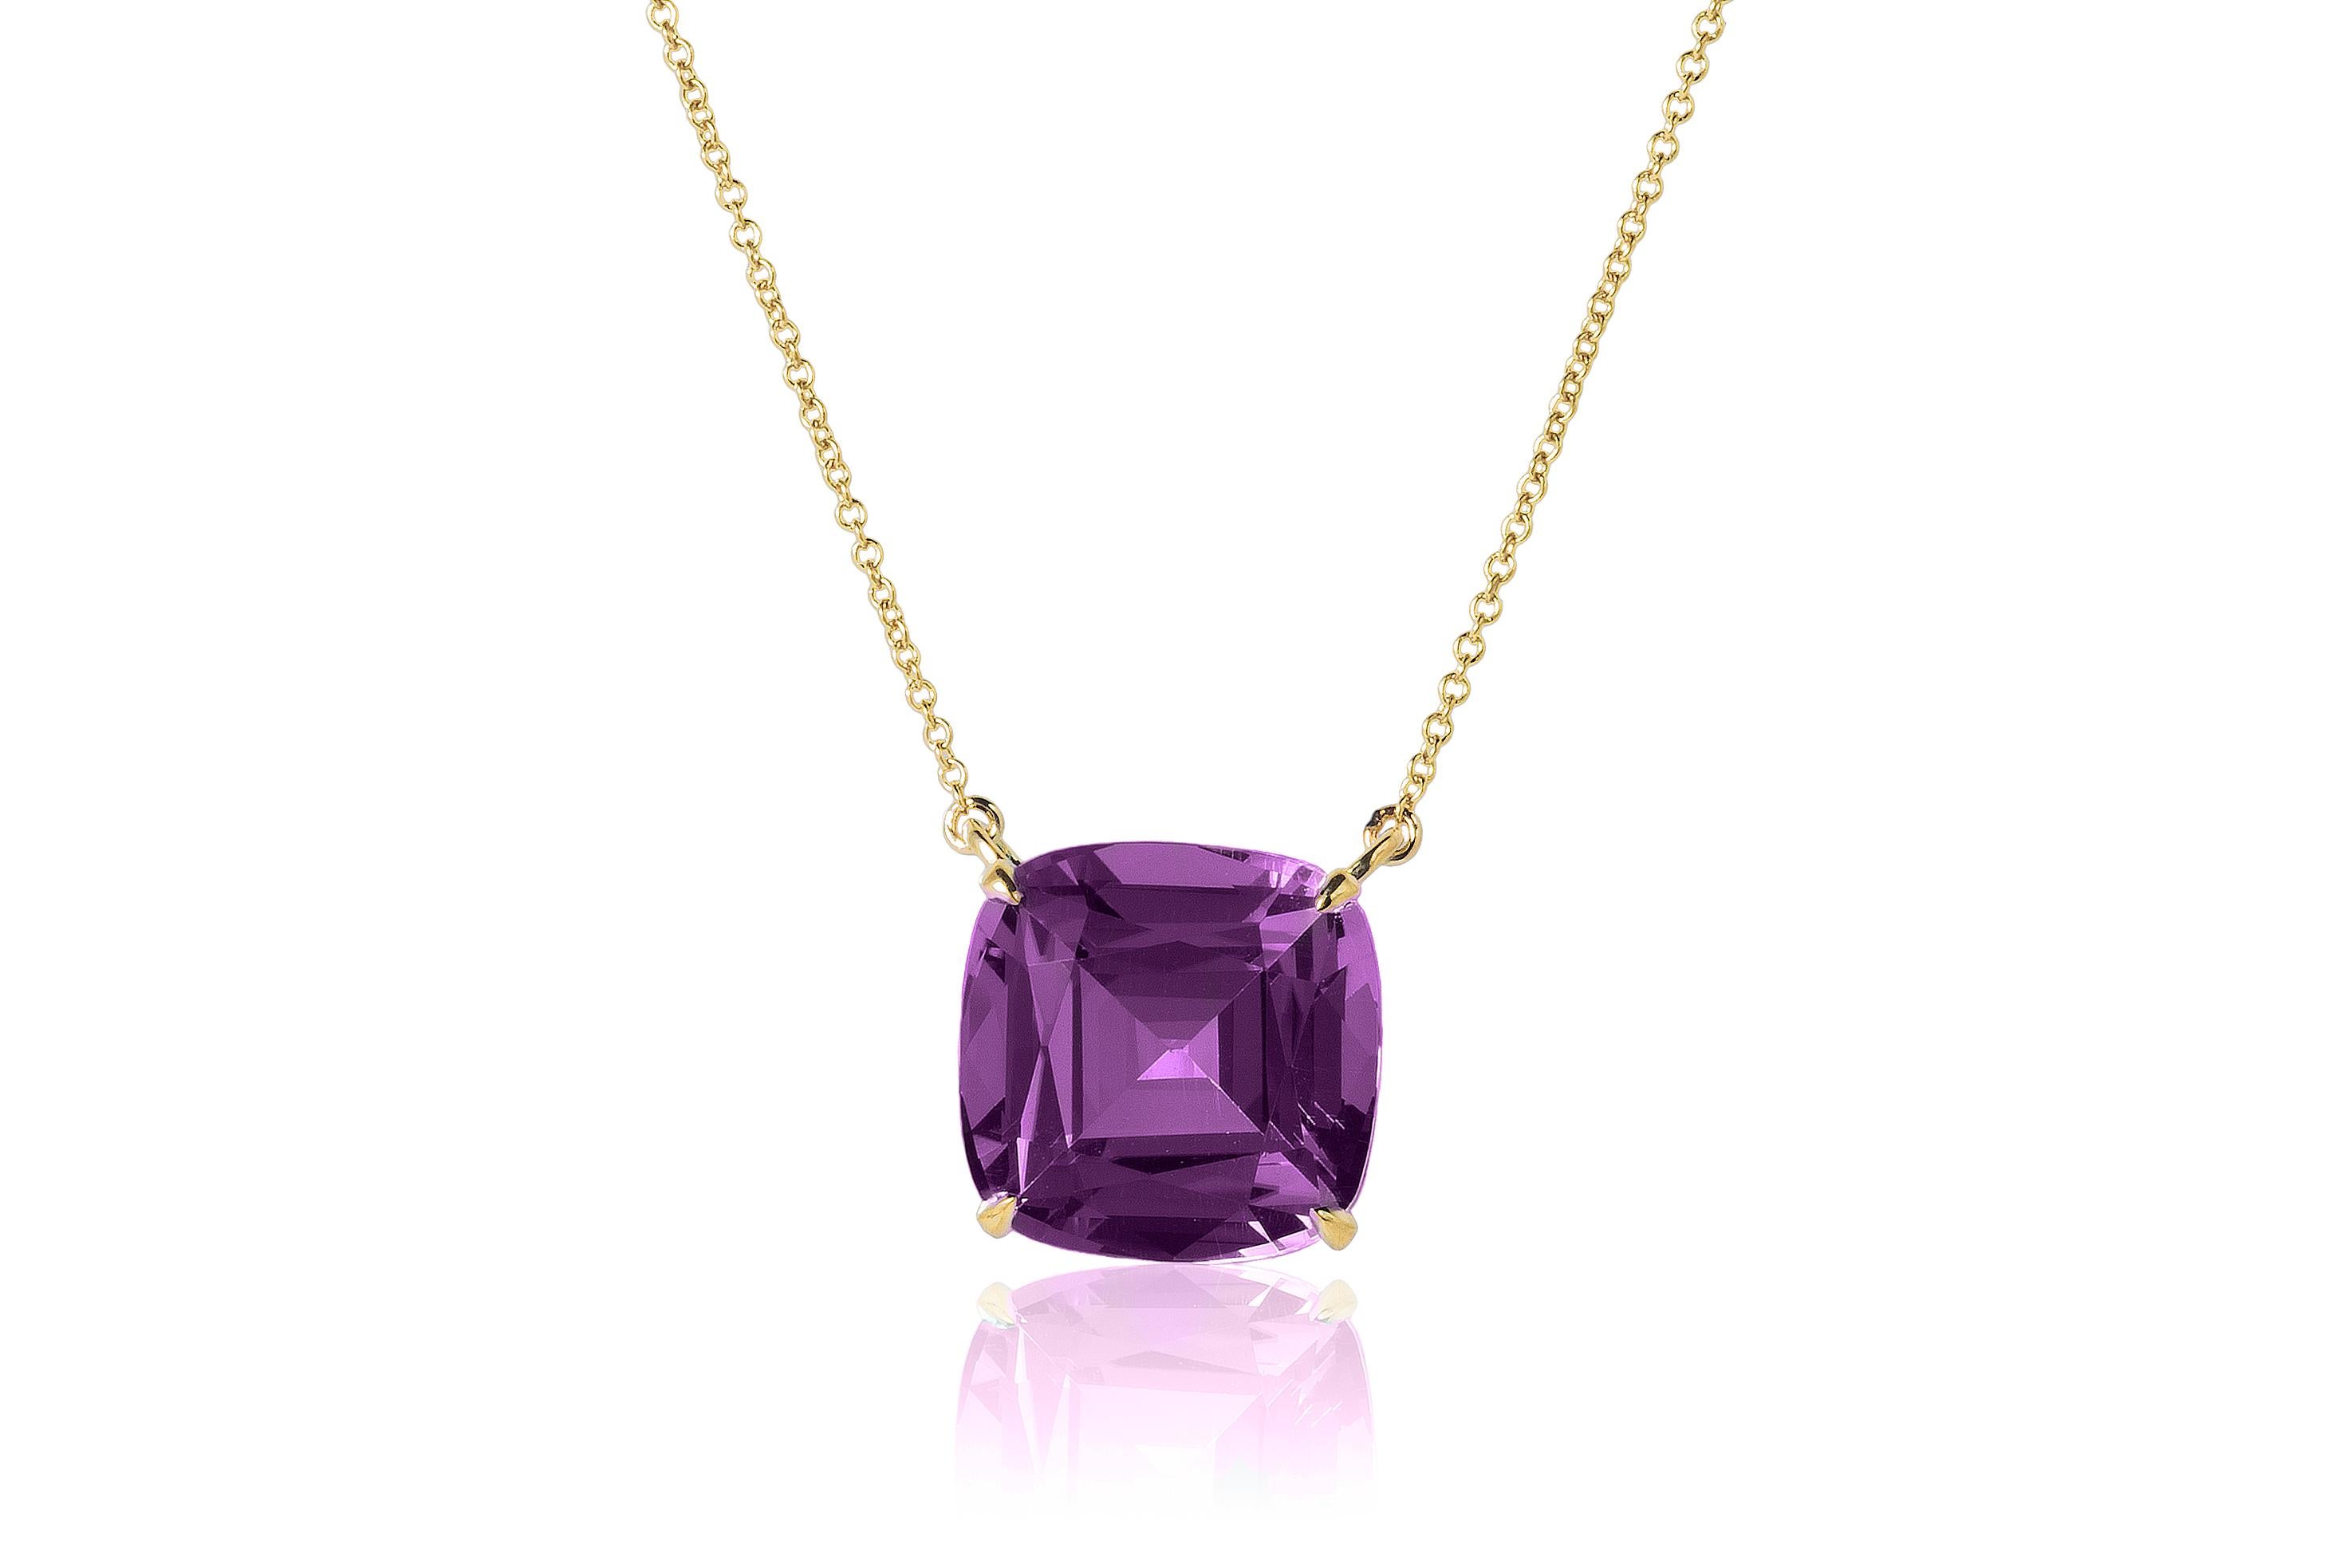 Amethyst Cushion Pendant on Cable Chain in 18K Yellow Gold from 'Gossip' Collection
Stone size: 14 x 14 mm
Gemstone Approx. Wt:  Amethyst- 11.30 Carats